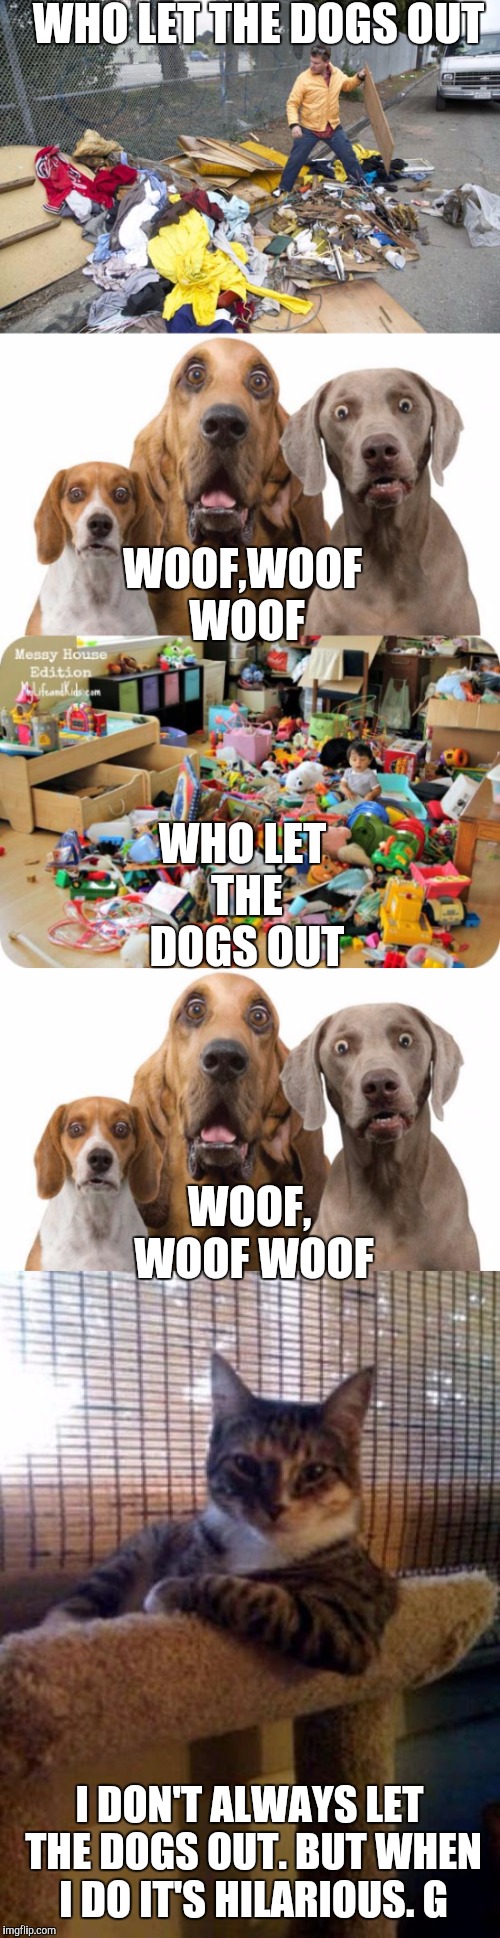 Who Let The Dogs Out | WHO LET THE DOGS OUT; WOOF,WOOF WOOF; WHO LET THE DOGS OUT; WOOF, WOOF WOOF; I DON'T ALWAYS LET THE DOGS OUT. BUT WHEN I DO IT'S HILARIOUS. G | image tagged in funny dogs,funny cats,memes,the most interesting cat in the world | made w/ Imgflip meme maker